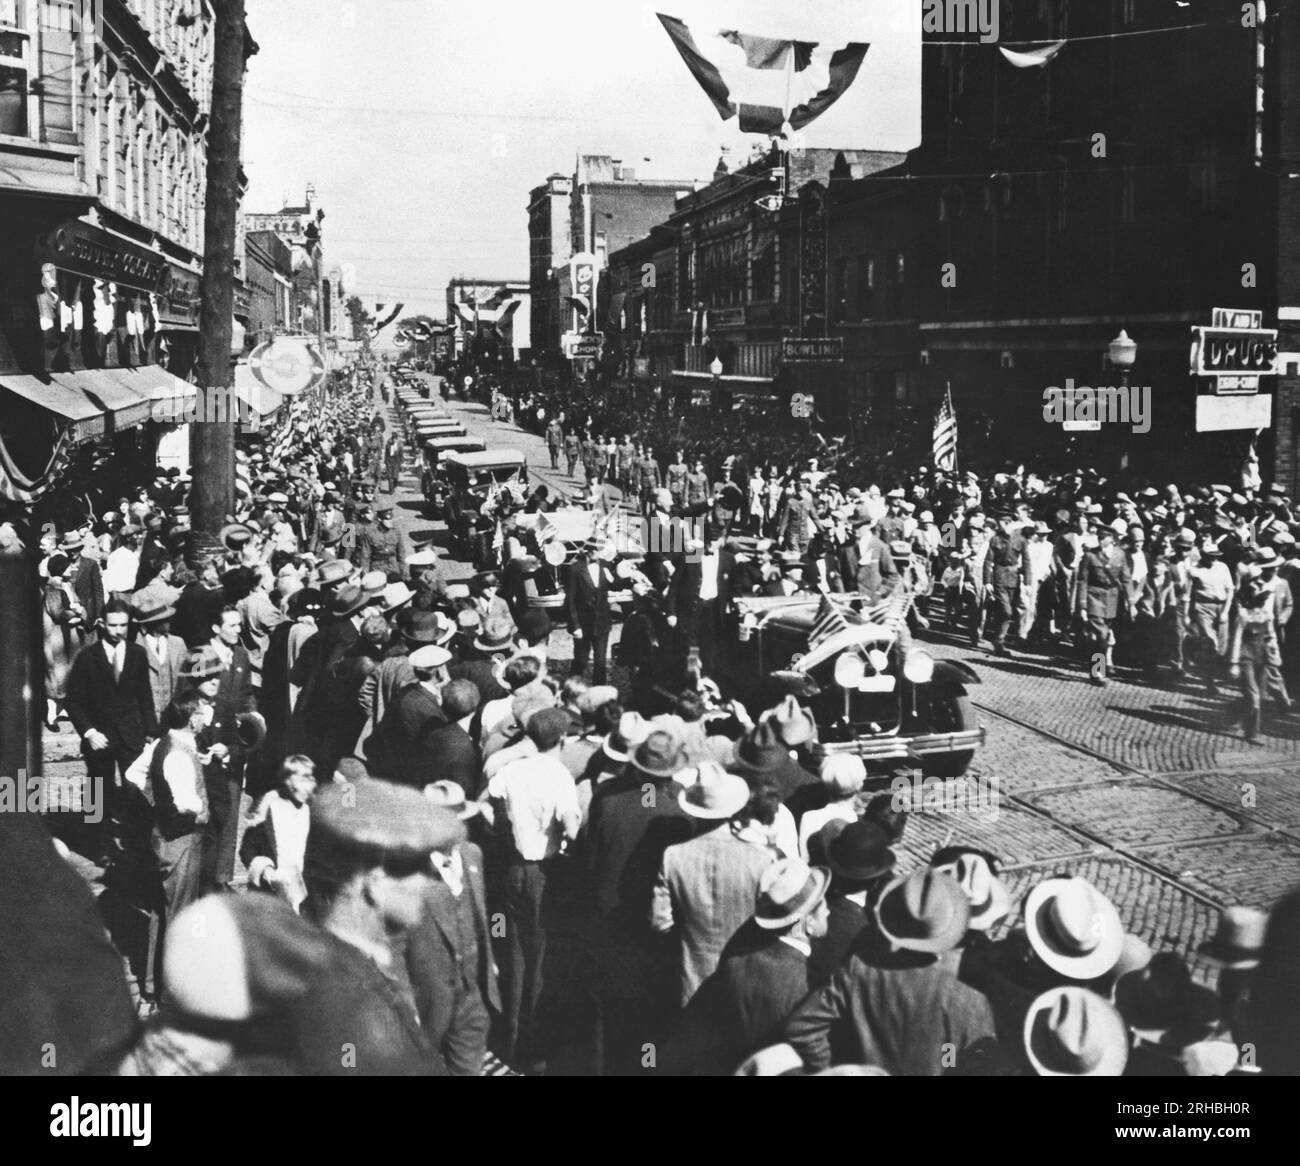 Sedalia, Missouri:  October 16, 1928 New York Governor Al Smith at the head of the parade in Sedalia during his campaign as the Democratic candiate for the U.S. Presidency in 1928. Stock Photo